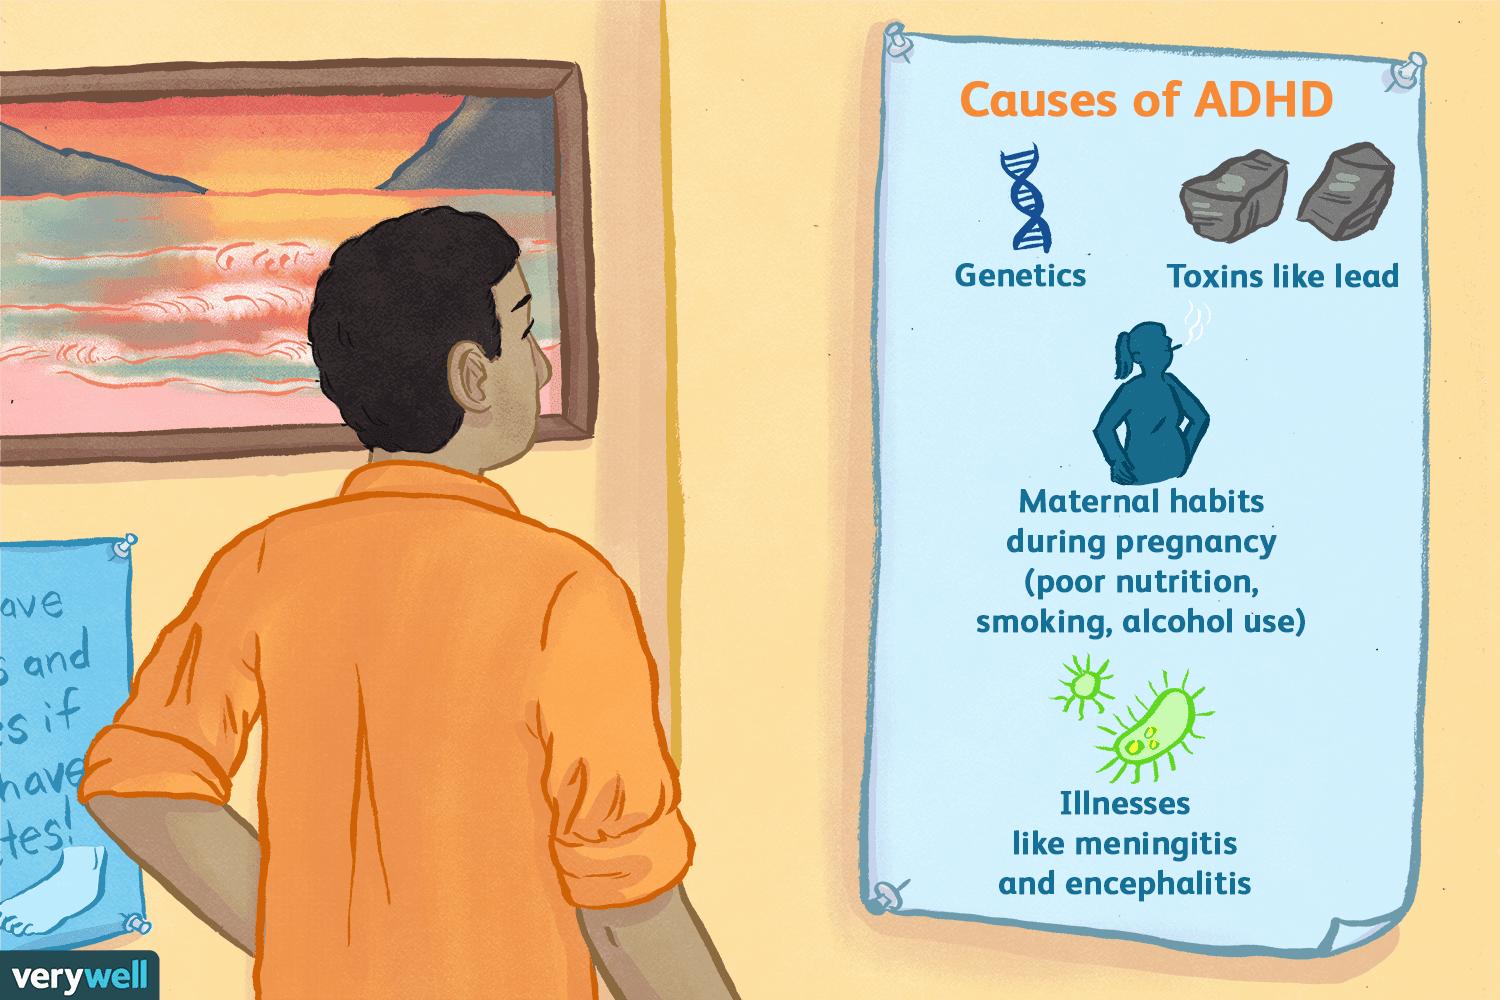 An illustration showing a man standing next to a poster that lists the causes of ADHD.